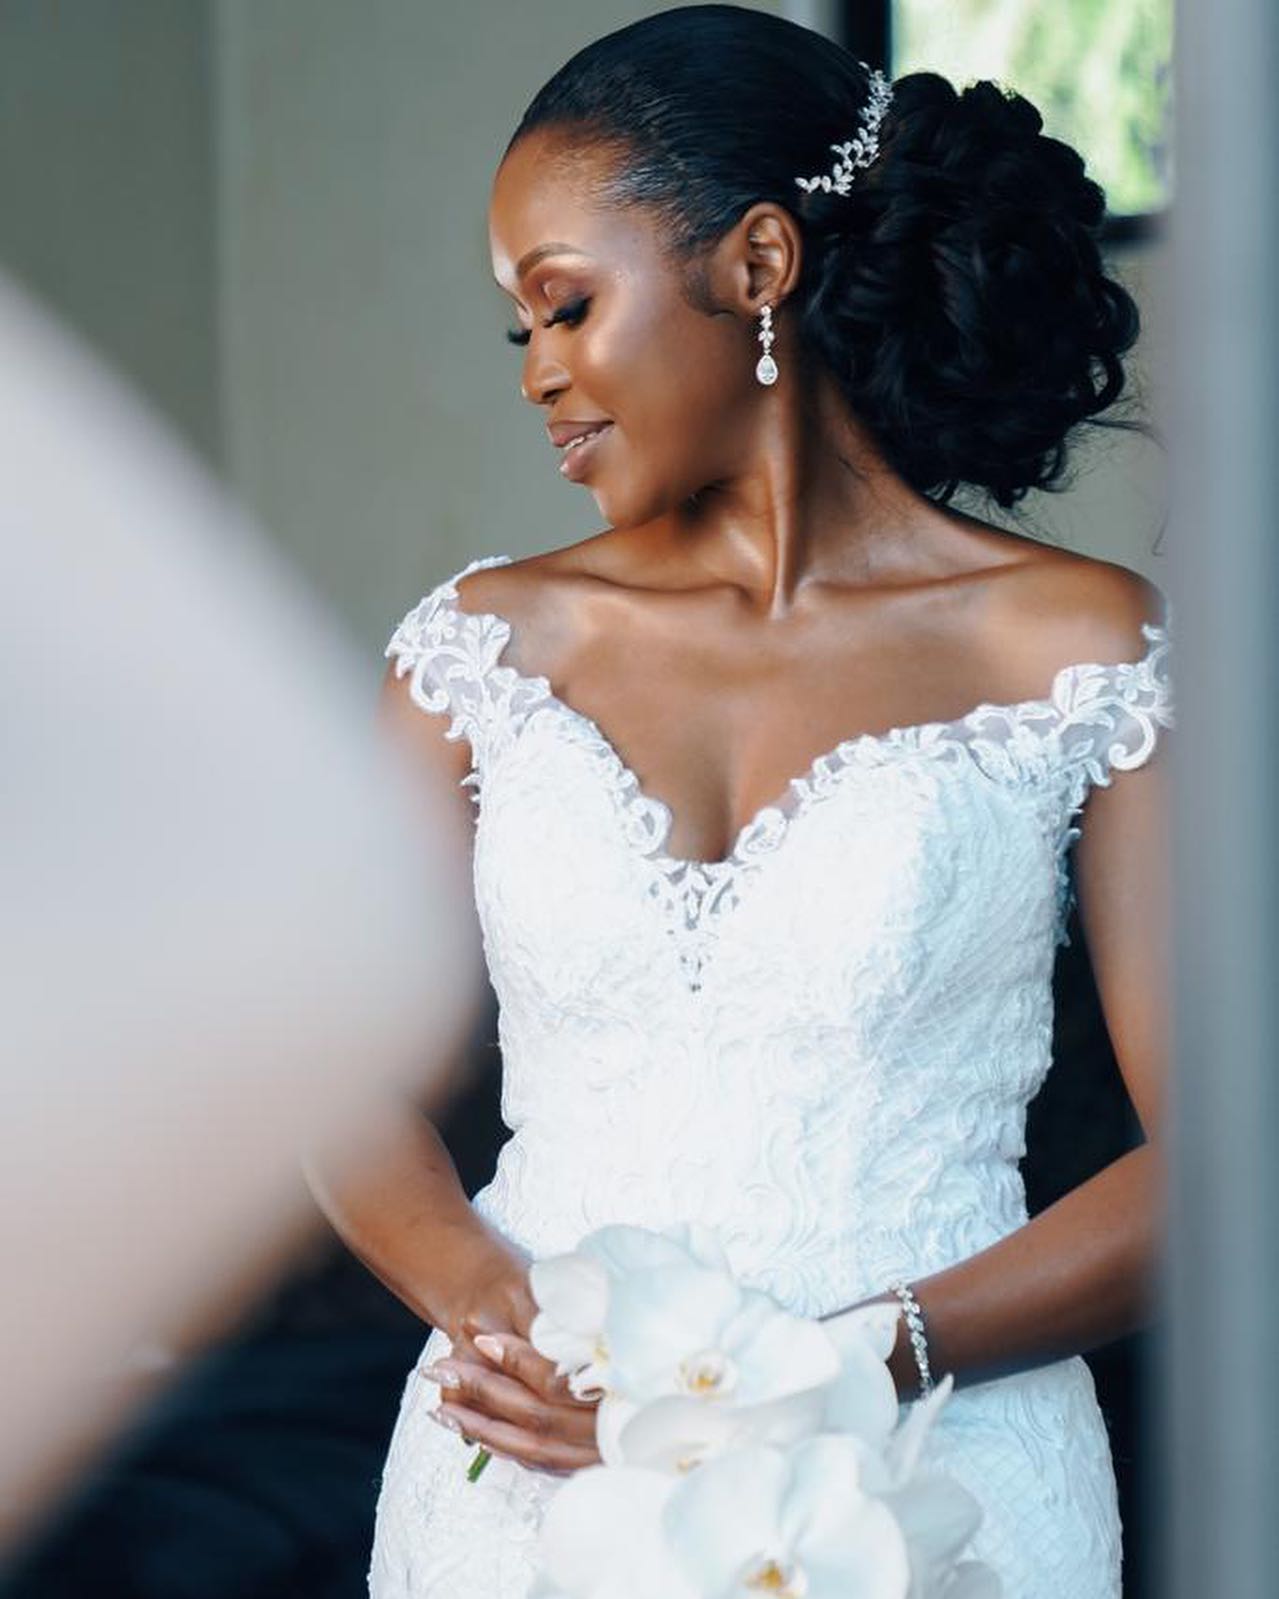 When to Cut Your Hair Ahead of Your Wedding Day